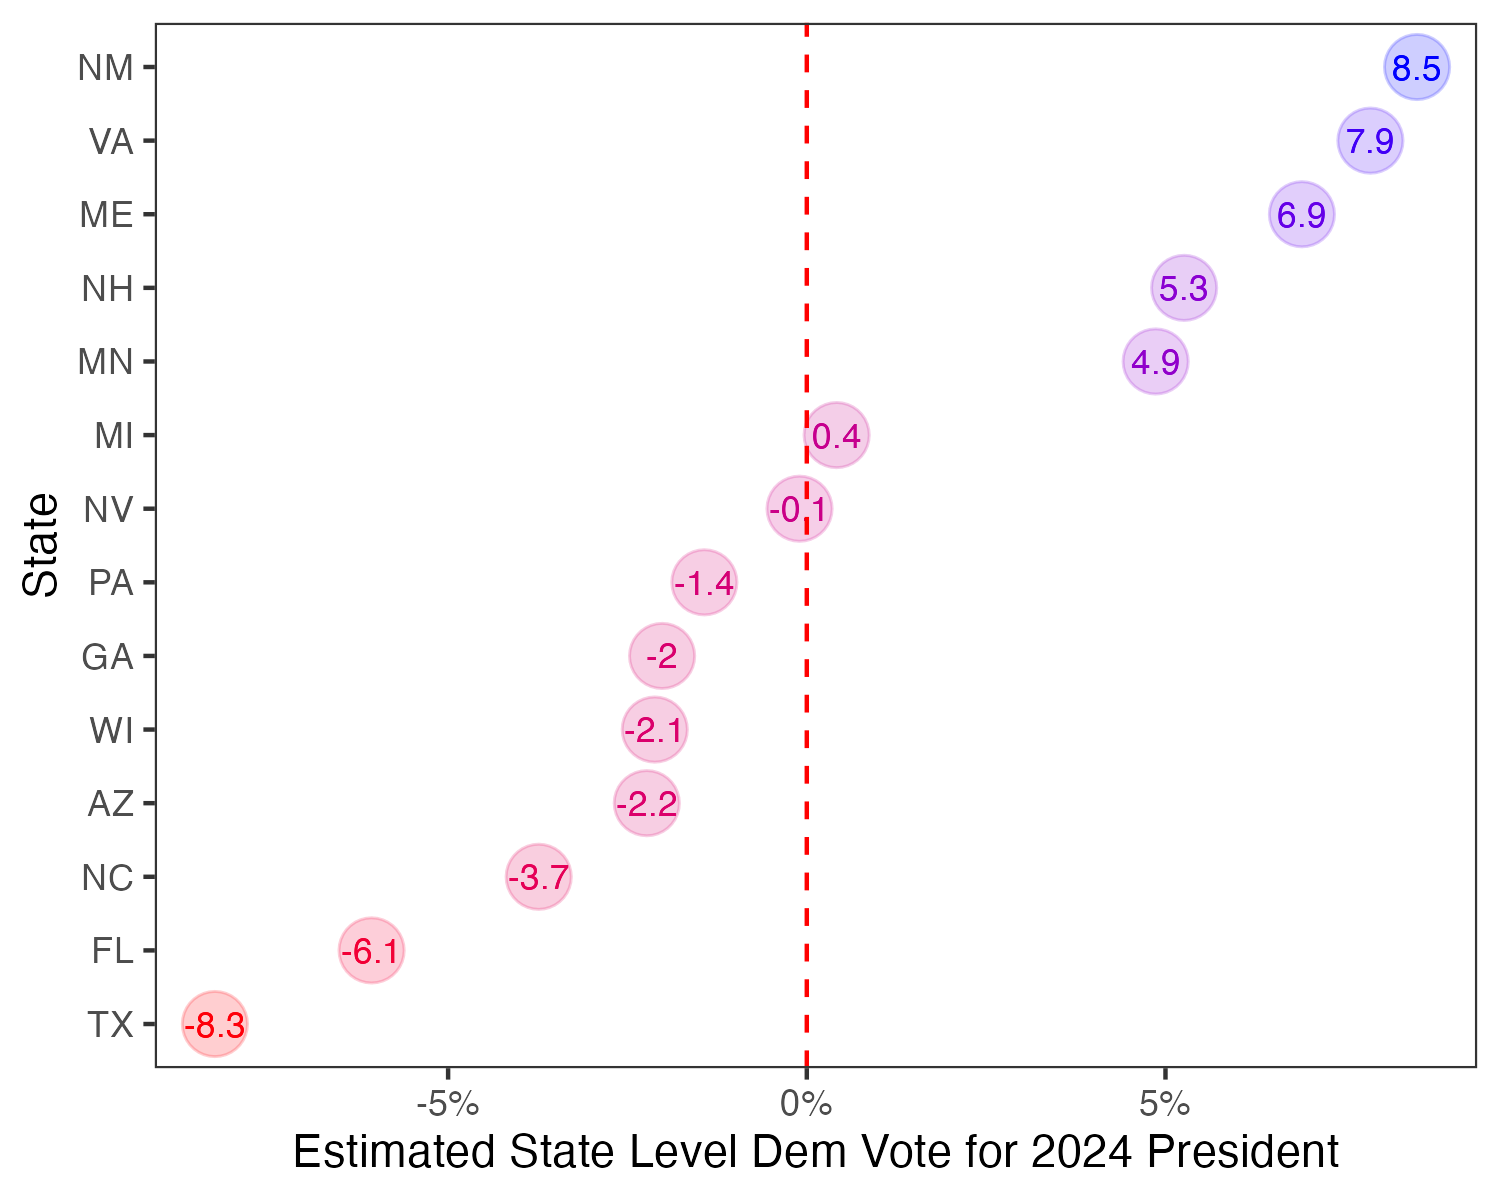 A simple forecast for 2024 battleground states. Hat tip to [Tom Cunningham](https://tecunningham.github.io) who suggested this plot design.